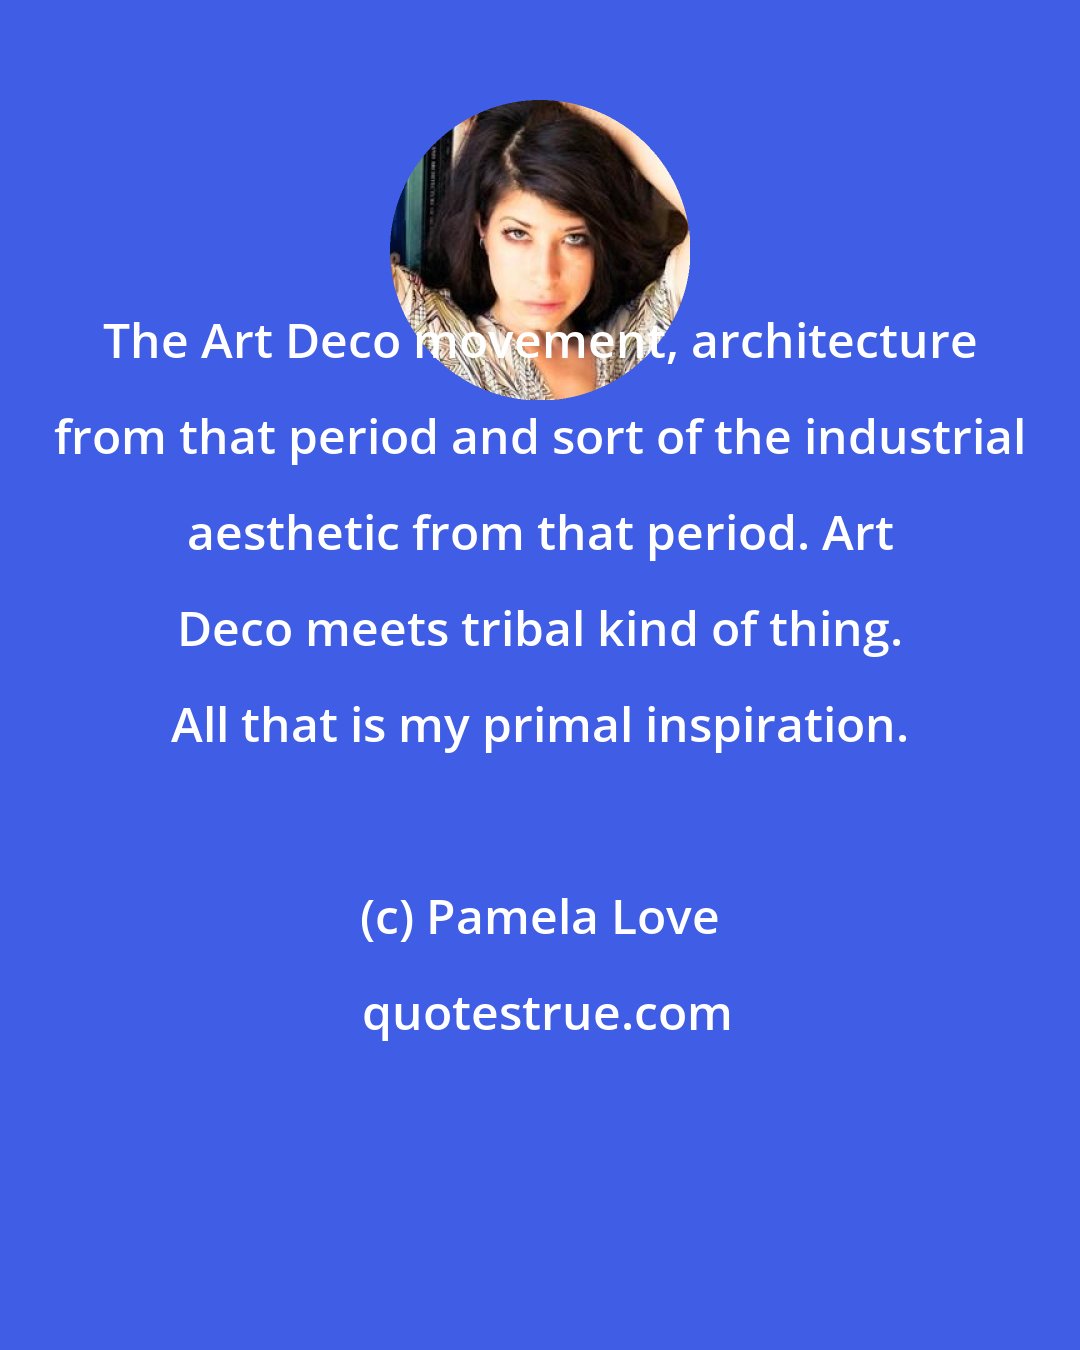 Pamela Love: The Art Deco movement, architecture from that period and sort of the industrial aesthetic from that period. Art Deco meets tribal kind of thing. All that is my primal inspiration.